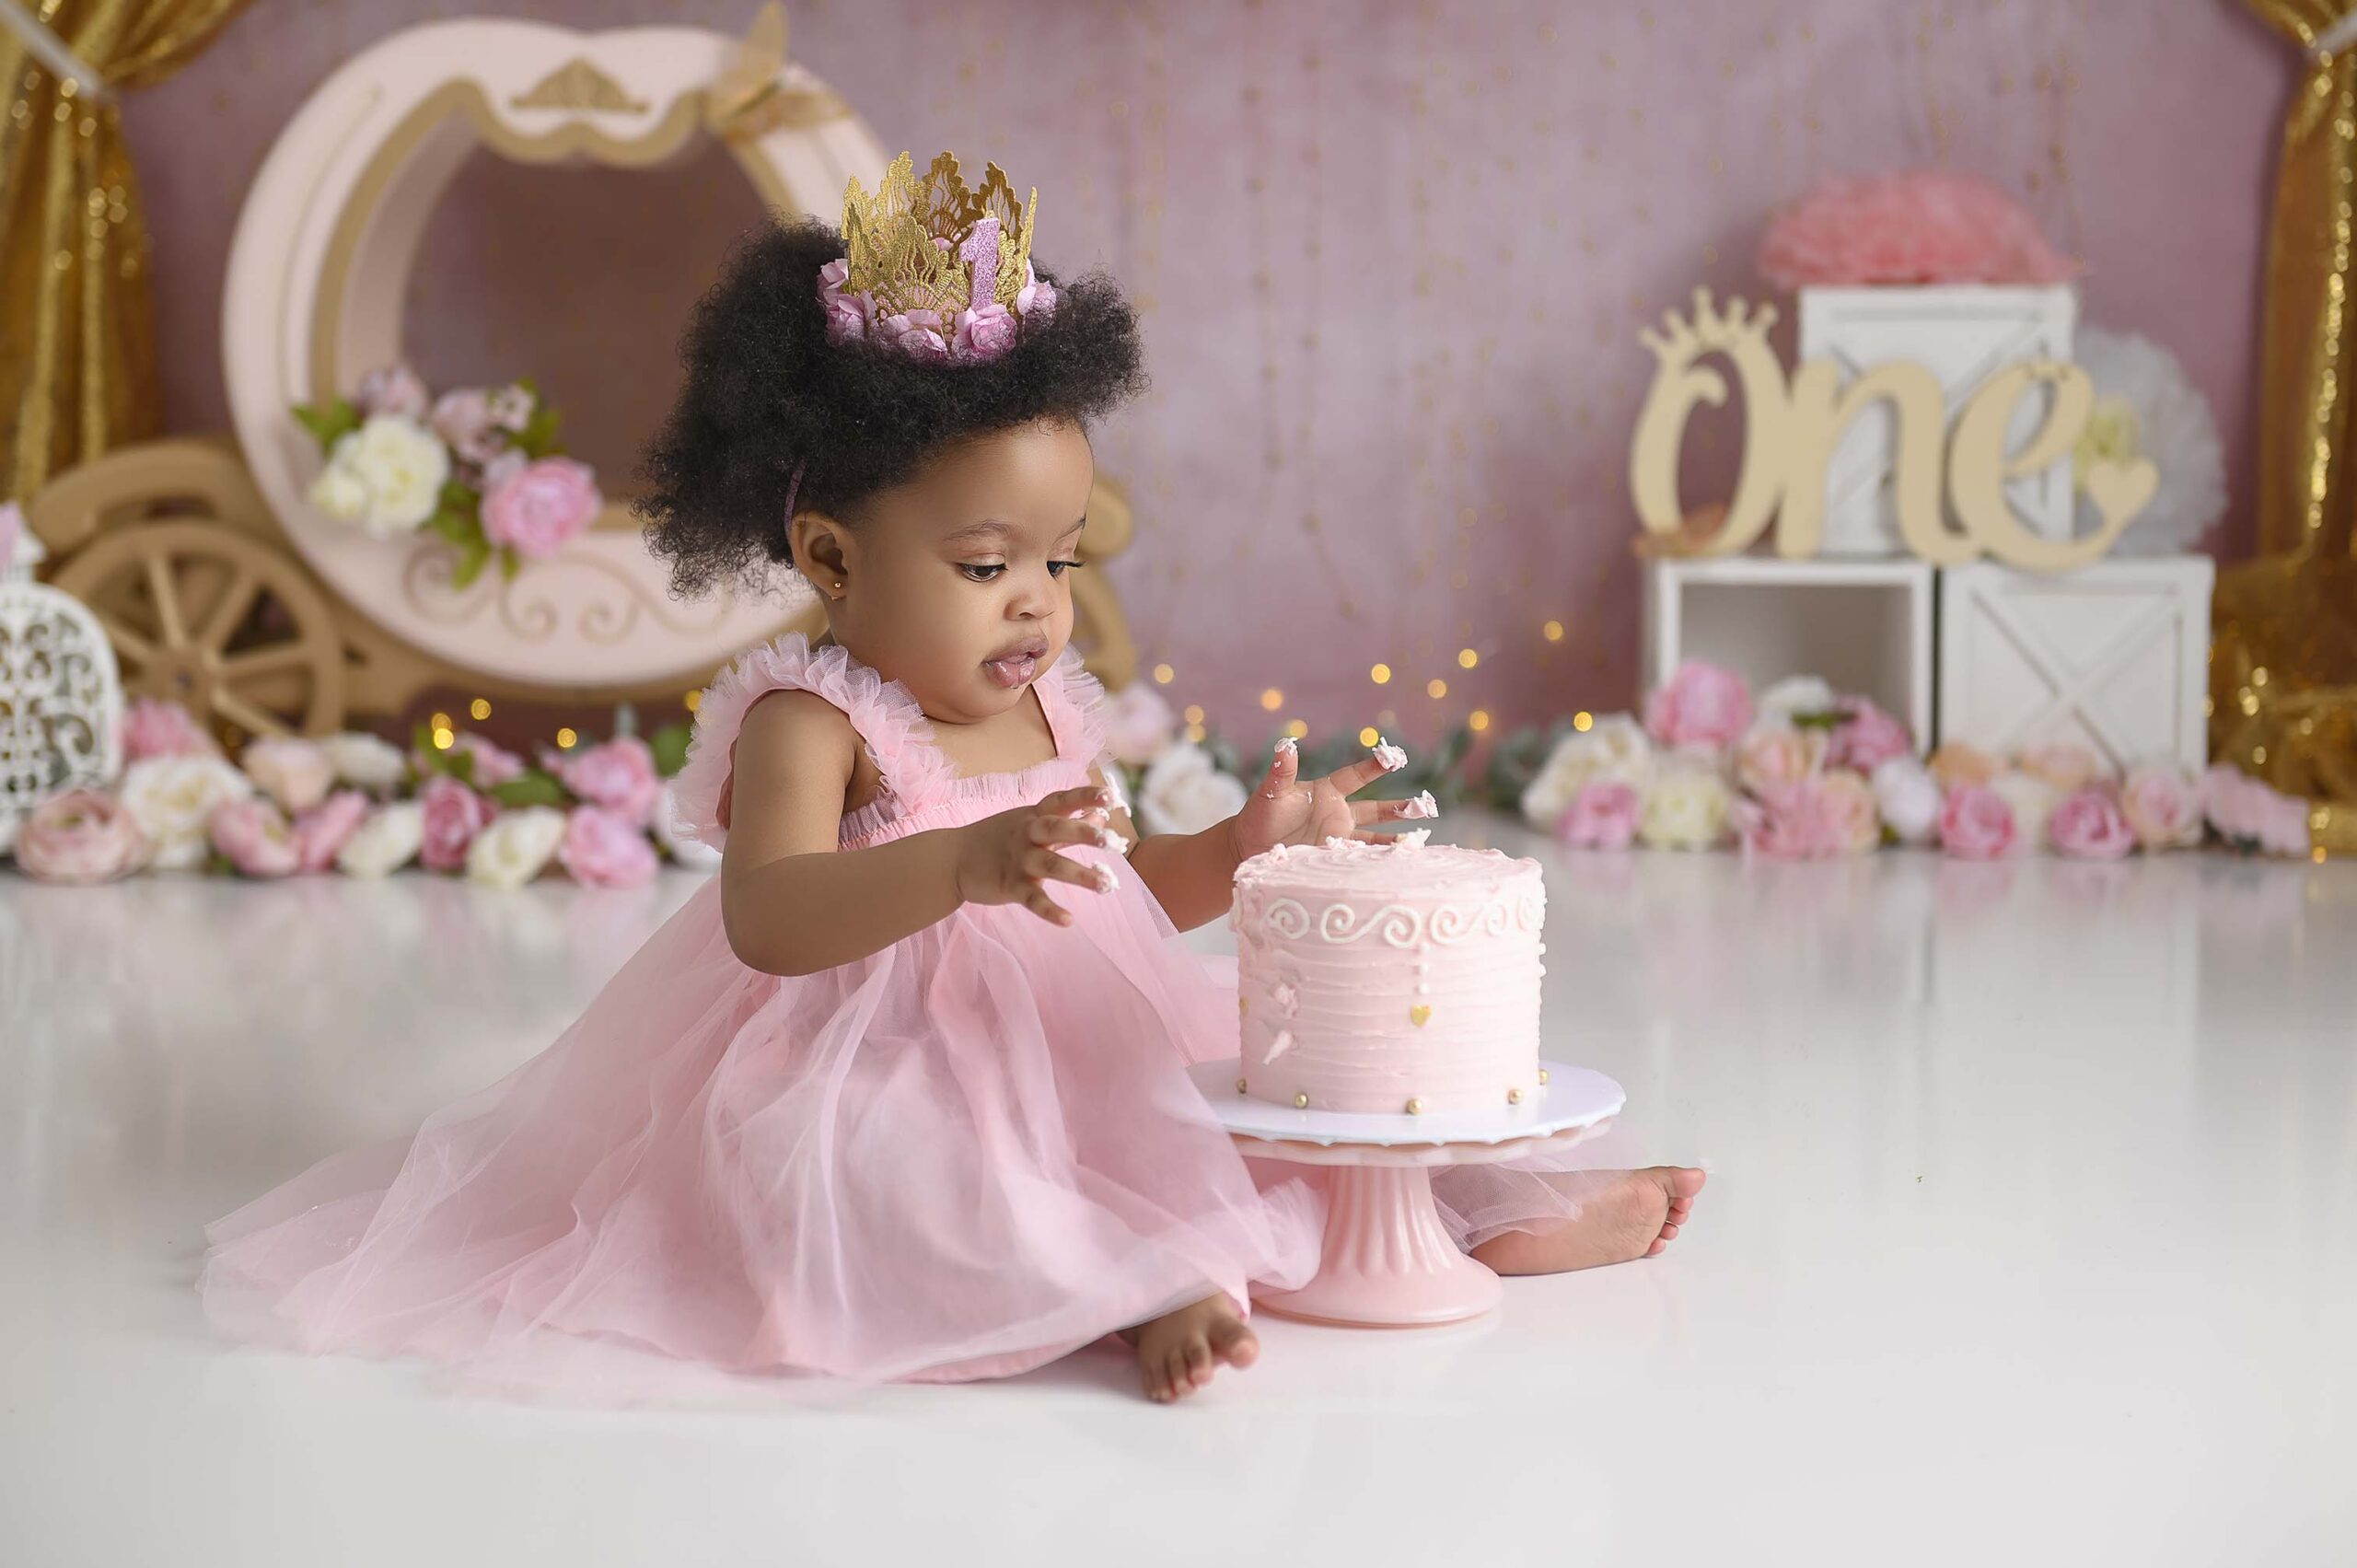 Keller-Roanoake-Trophy-Club-Leslie-Christine-Photography-cake-smash-photos-first-birthday-one-year-old-girl-princess-carriage-pink-gold-flowers-13